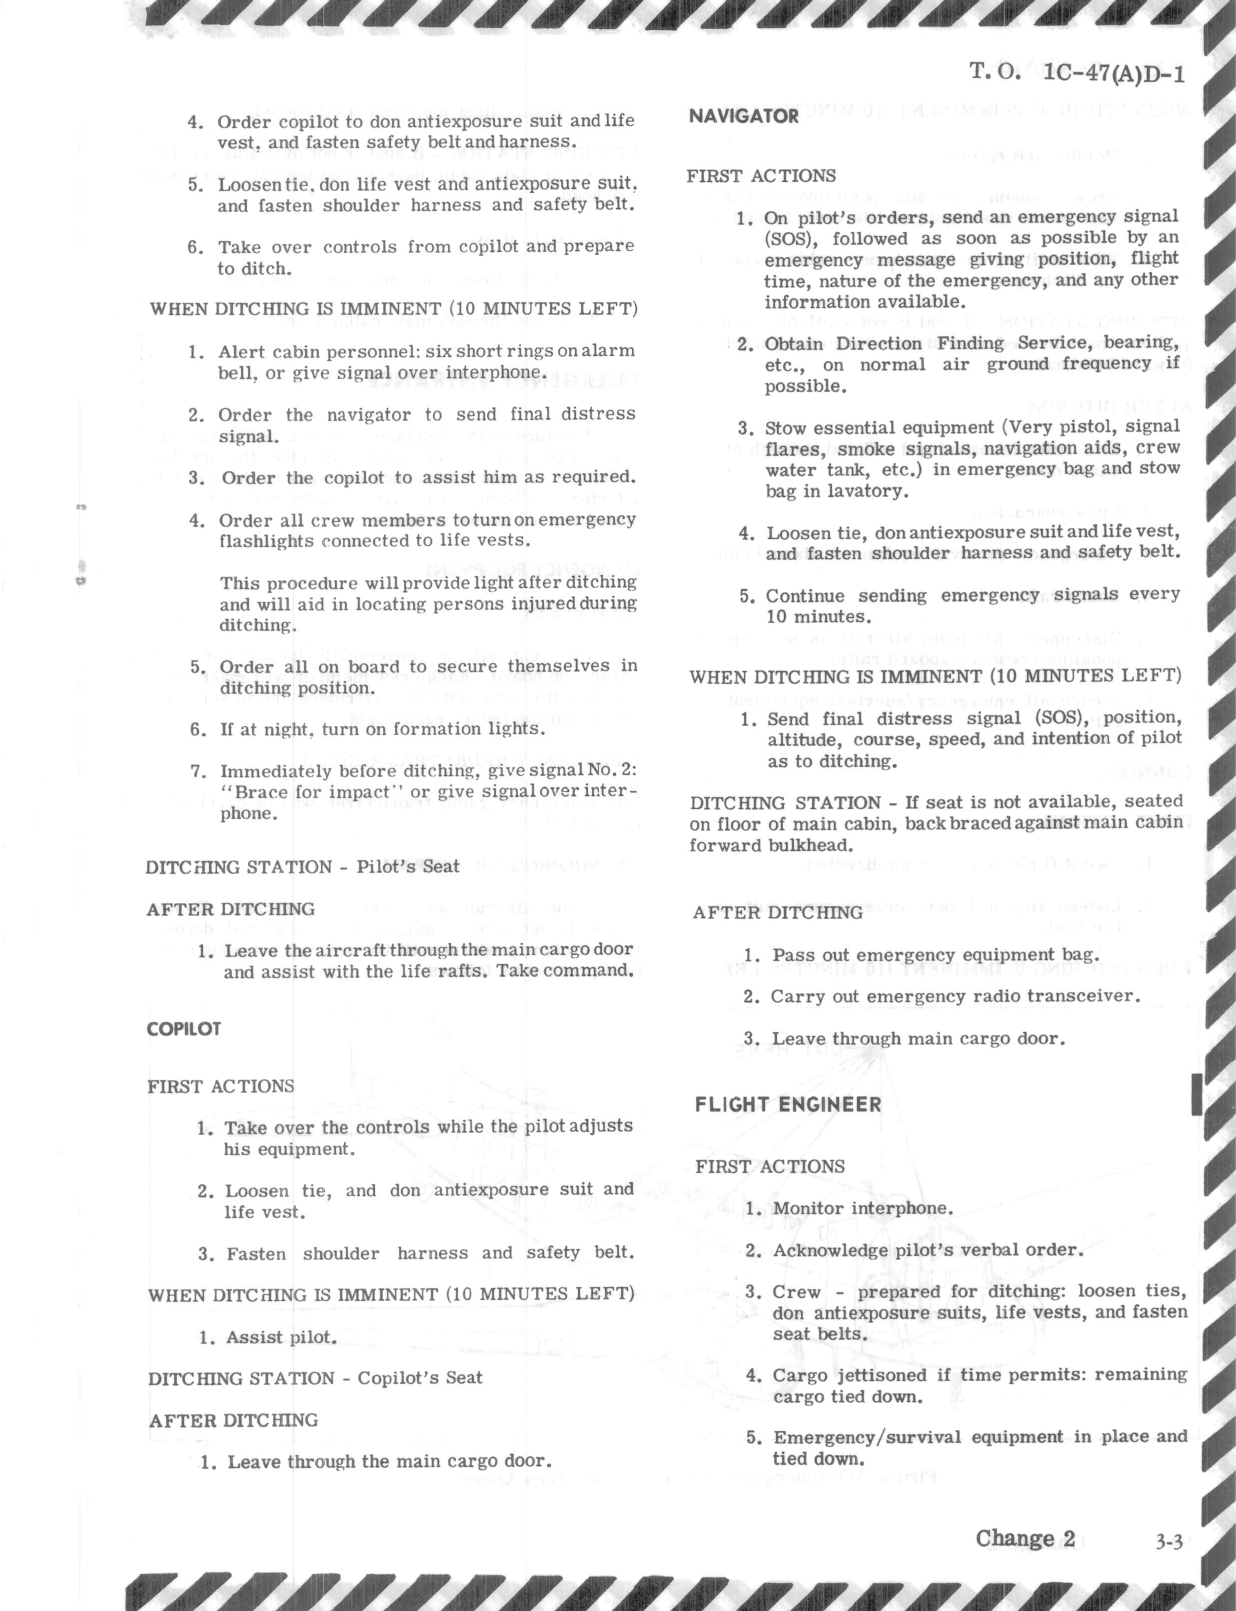 Sample page 11 from AirCorps Library document: Partial Flight Manual for AC-47D Aircraft